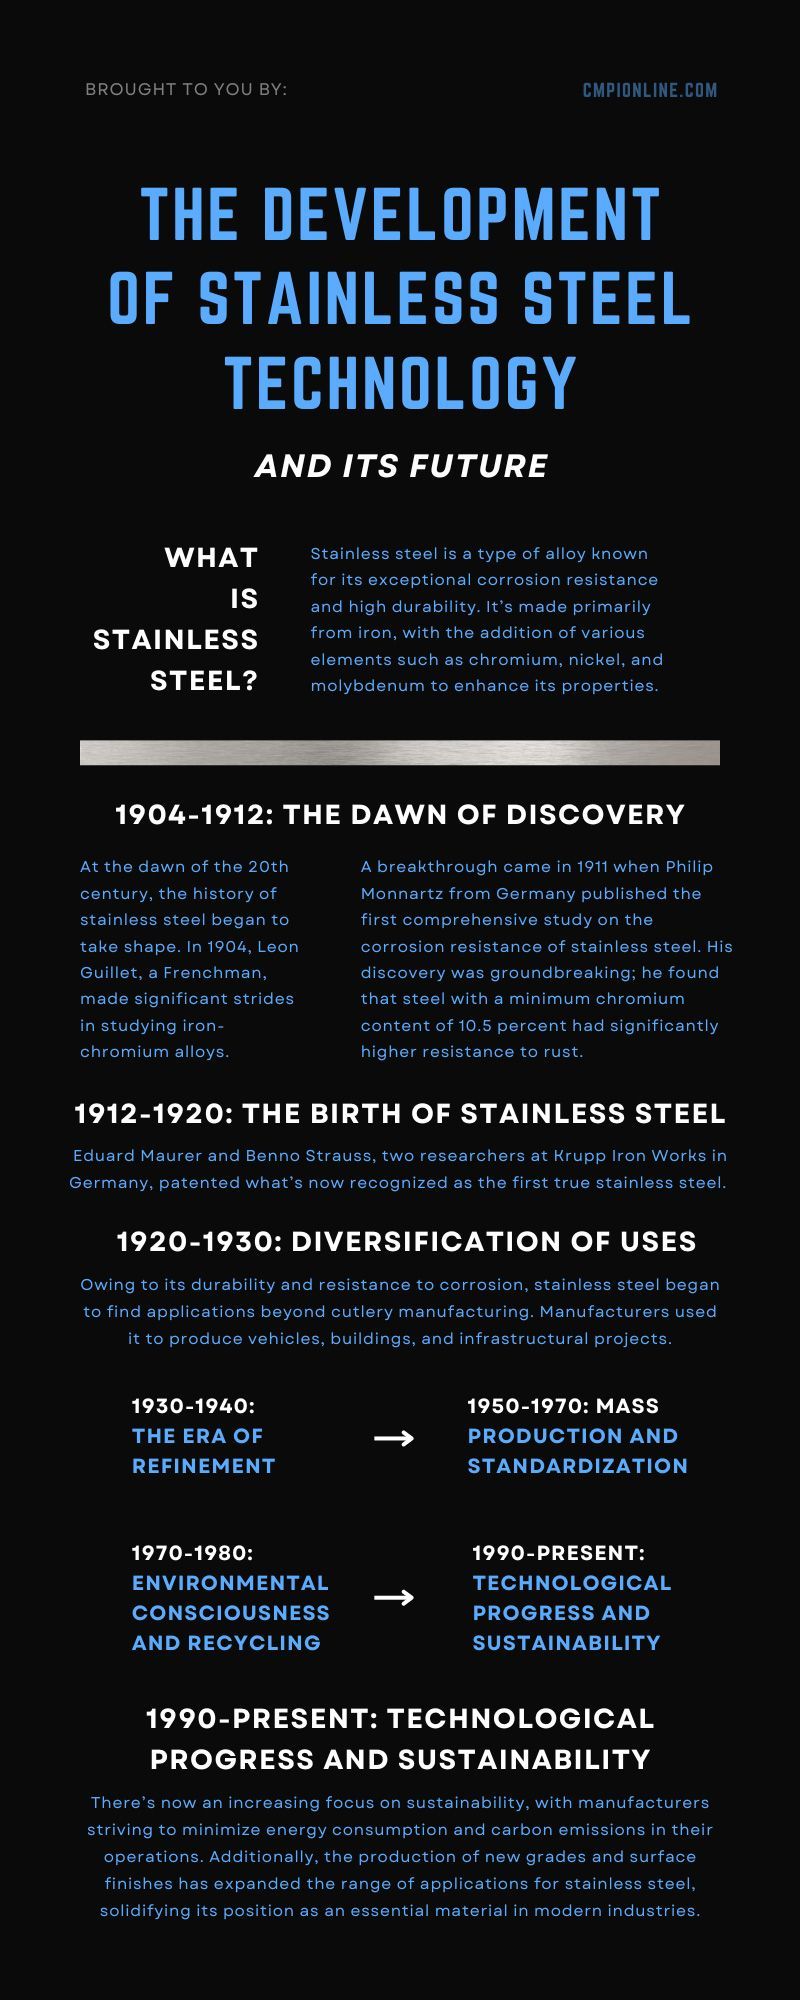 The Development of Stainless Steel Technology and Its Future